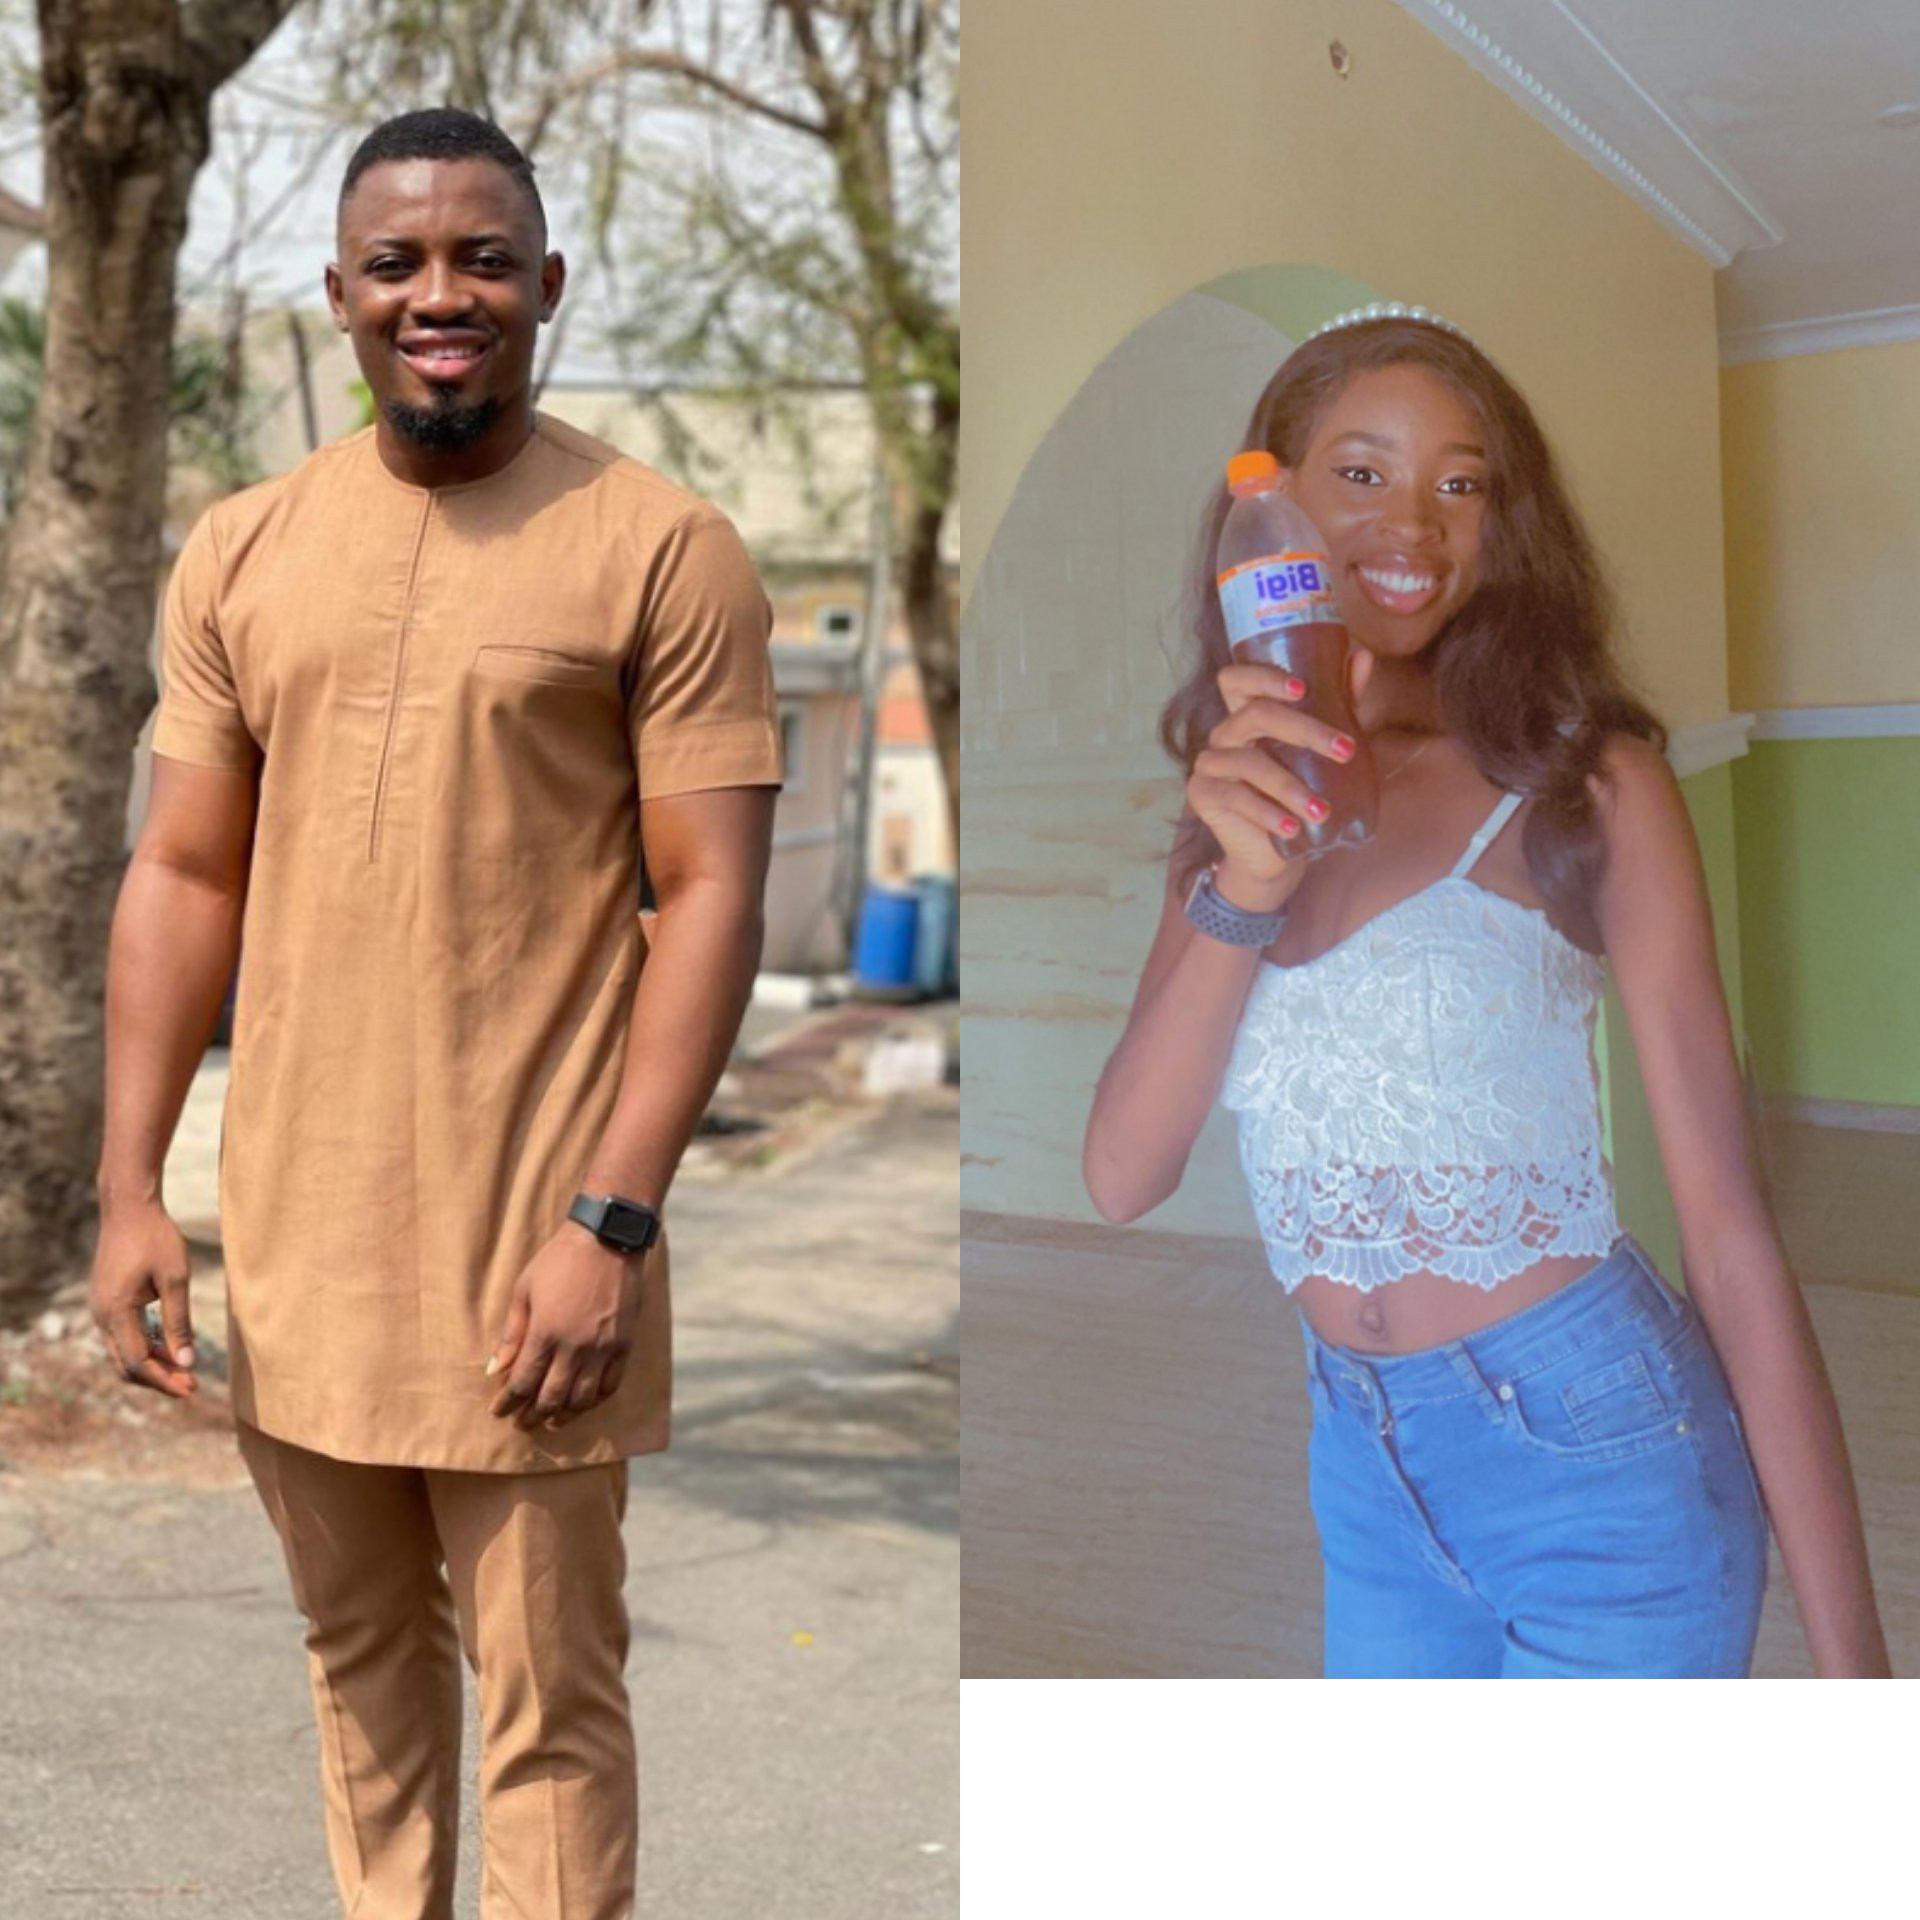 twitter influencer accuses her boyfriend of abusing her and conniving with police to intimidate her he responds with his side of the story